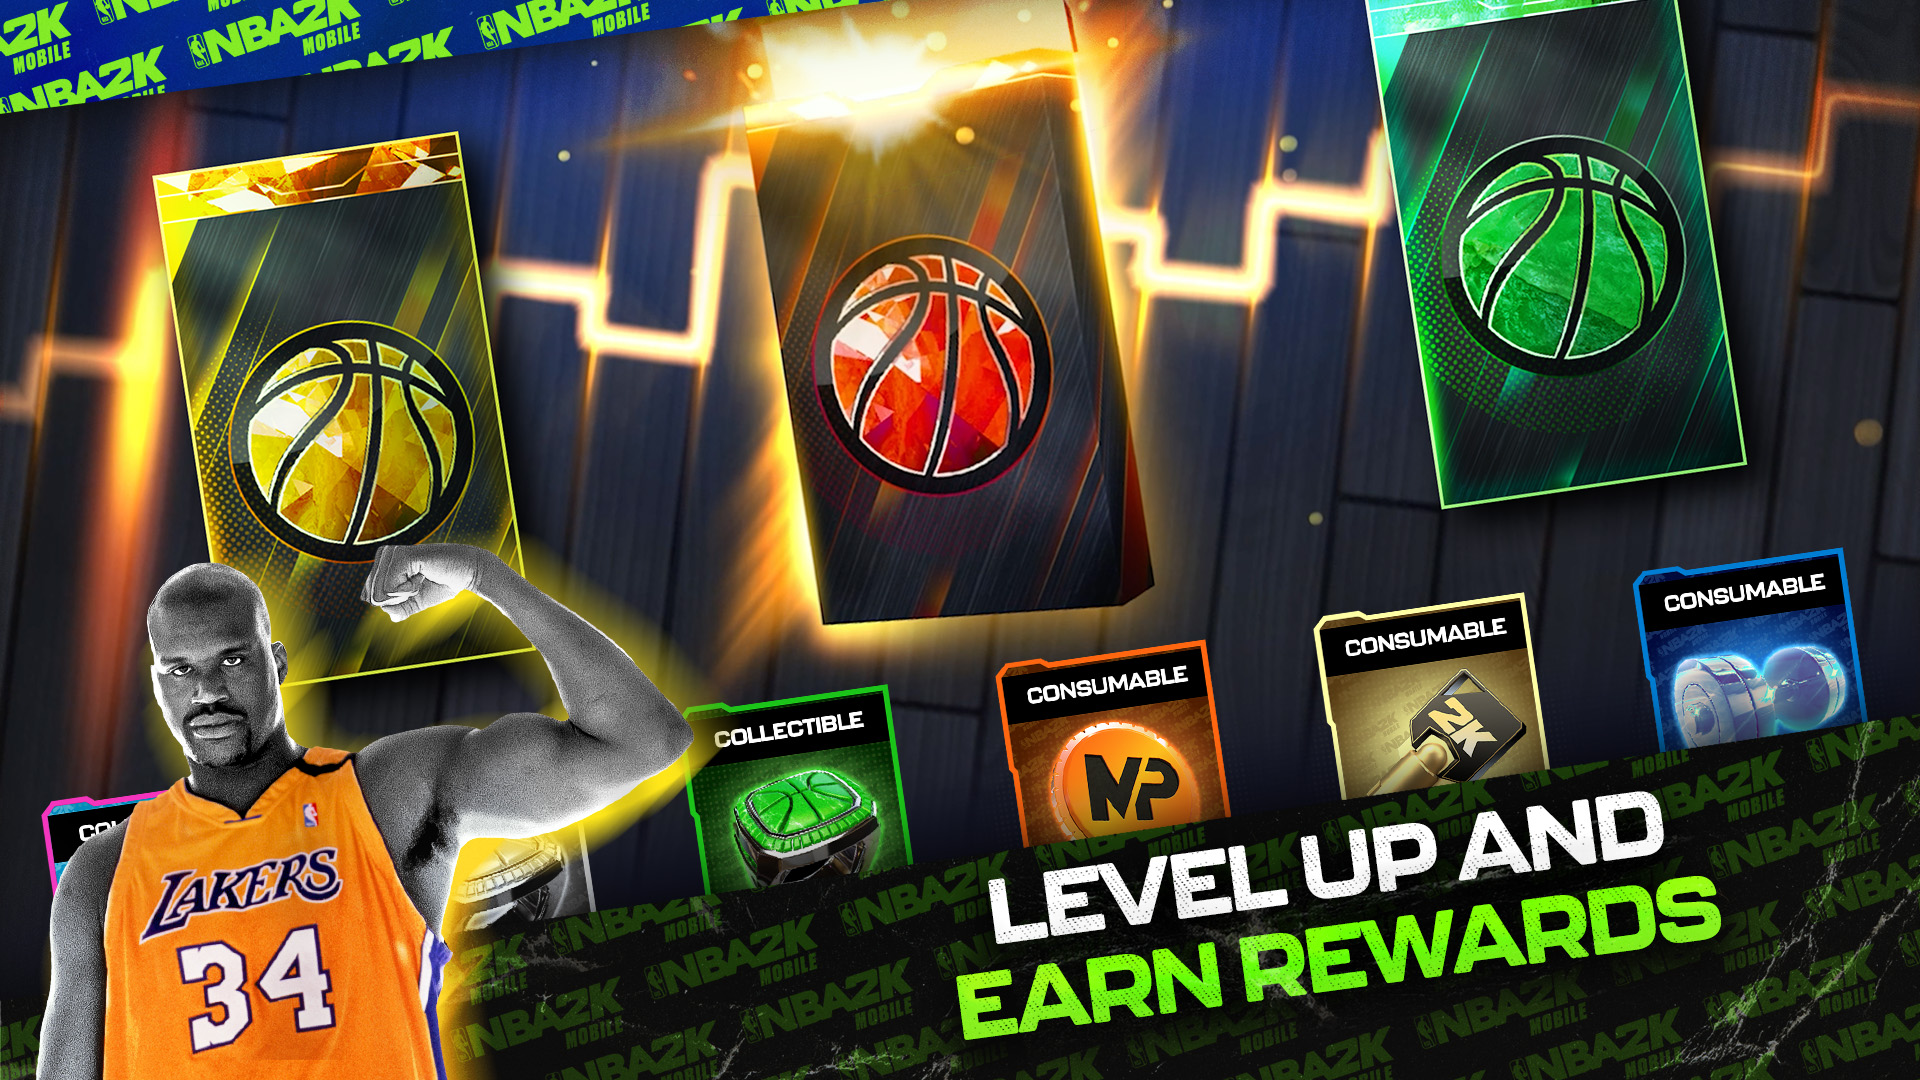 Level up and Earn Rewards